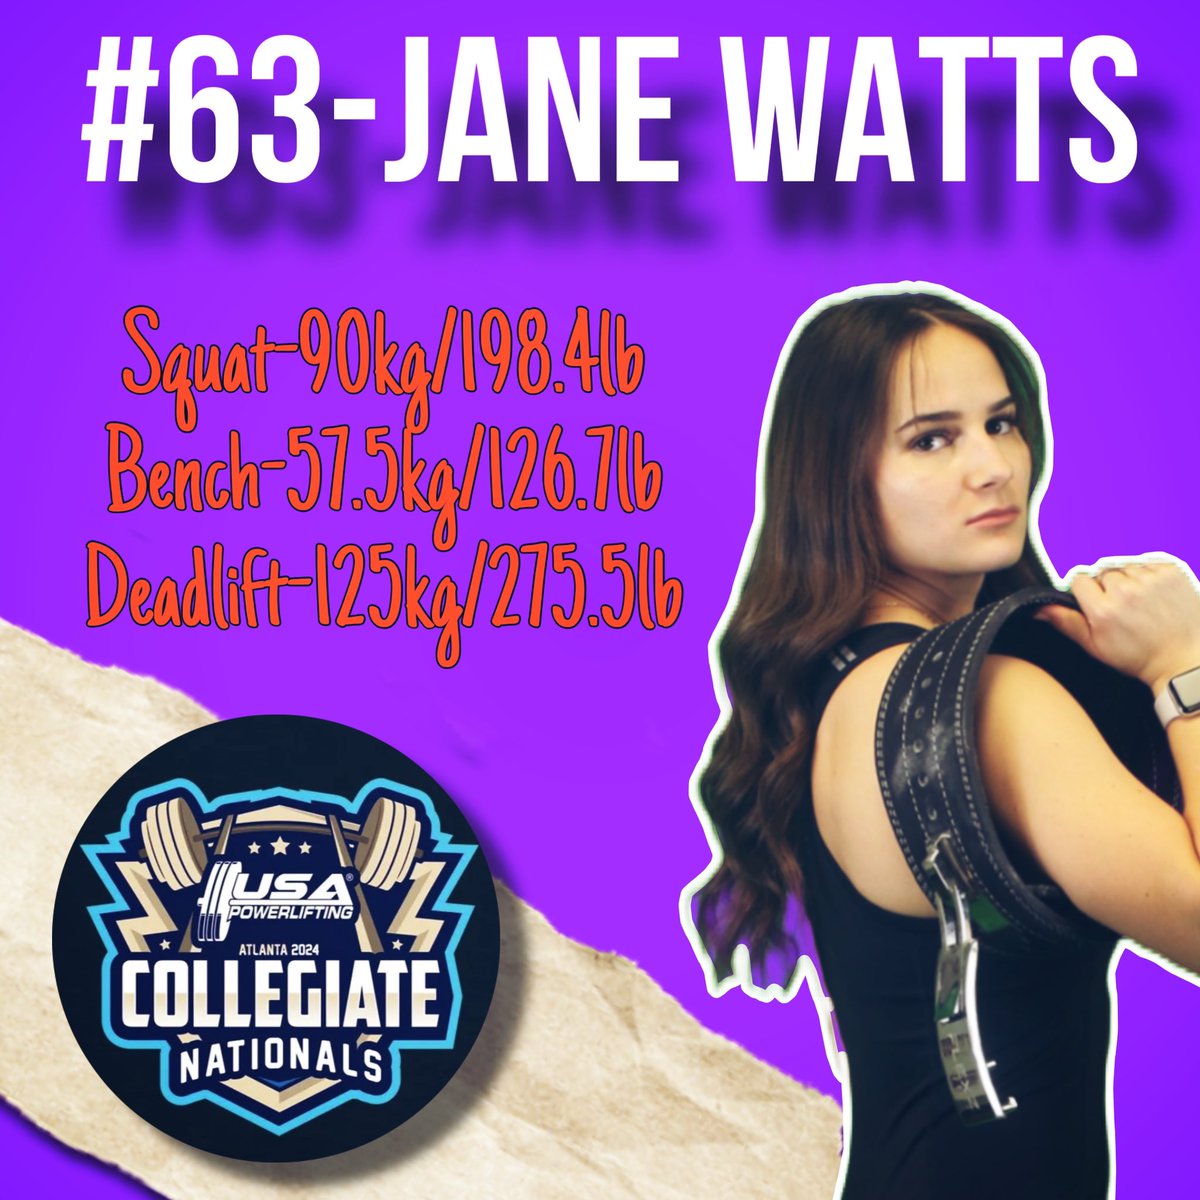 Jane Watts wraps up her first and final Collegiate Nationals at #63 in the country! 💪💜🧡
#ValleyWillRoll #HoistTheBanner